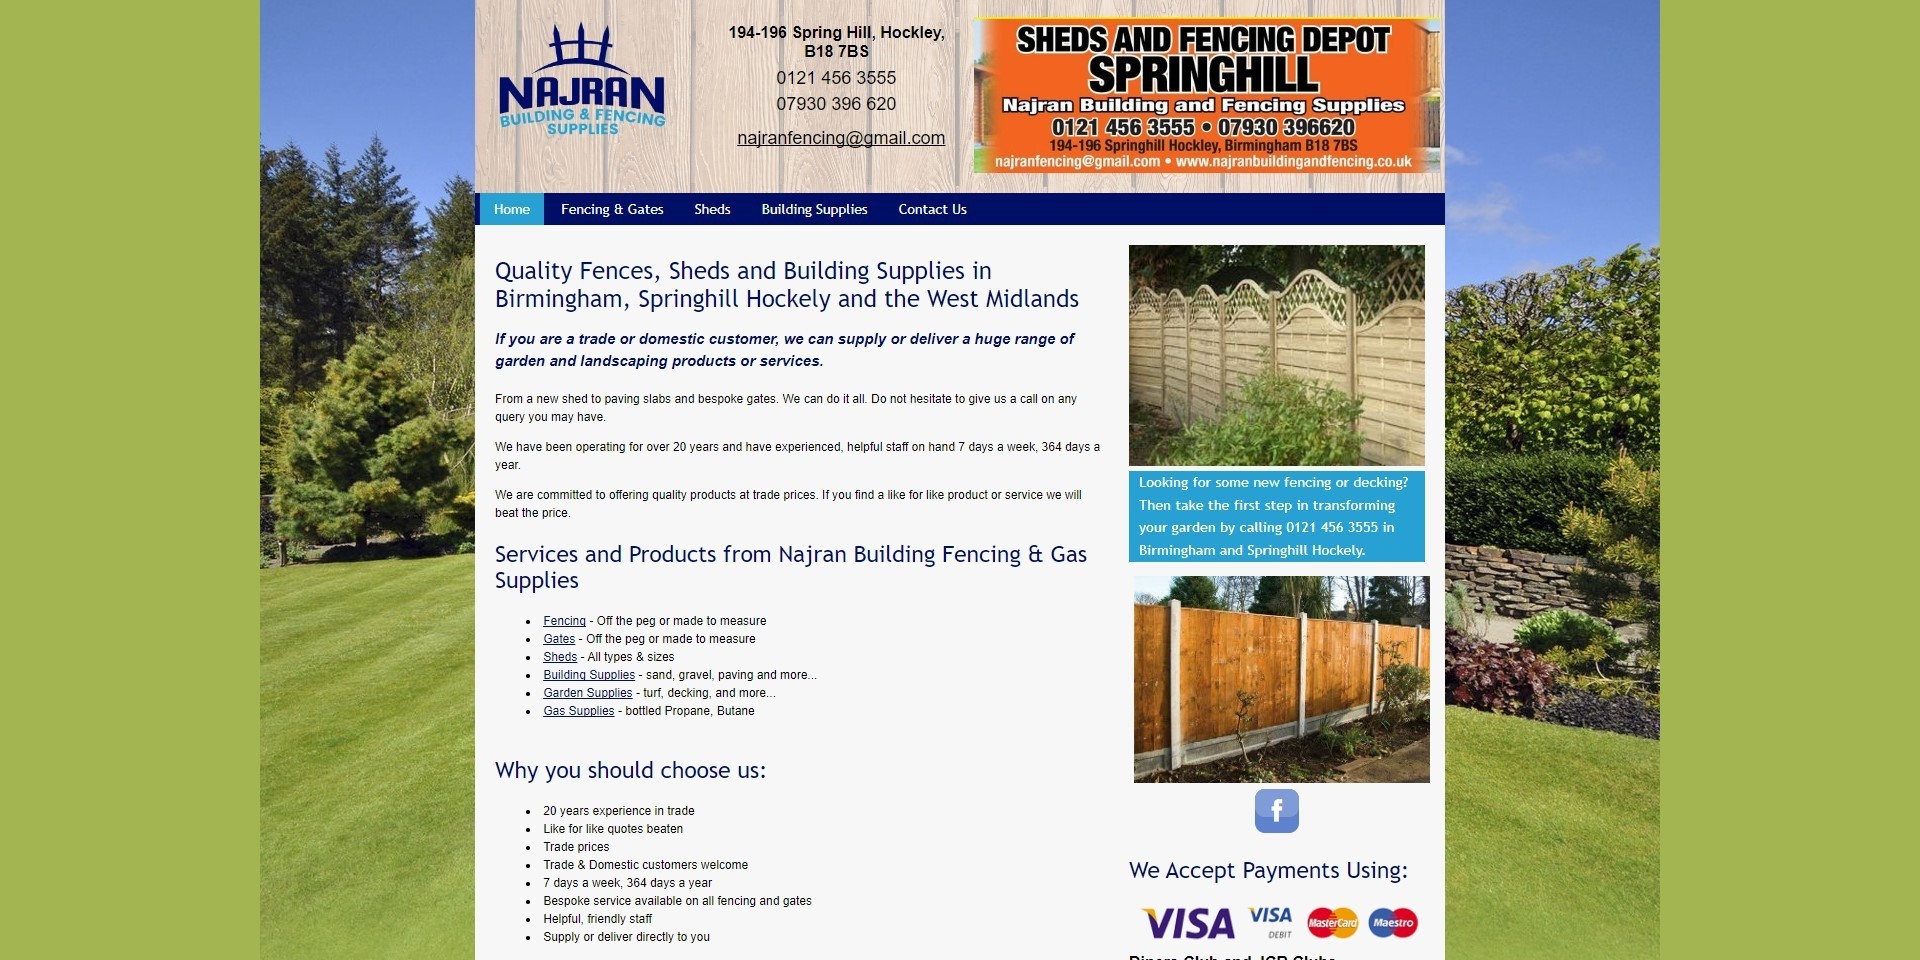 The unresponsive website for Najran Building and Fencing company